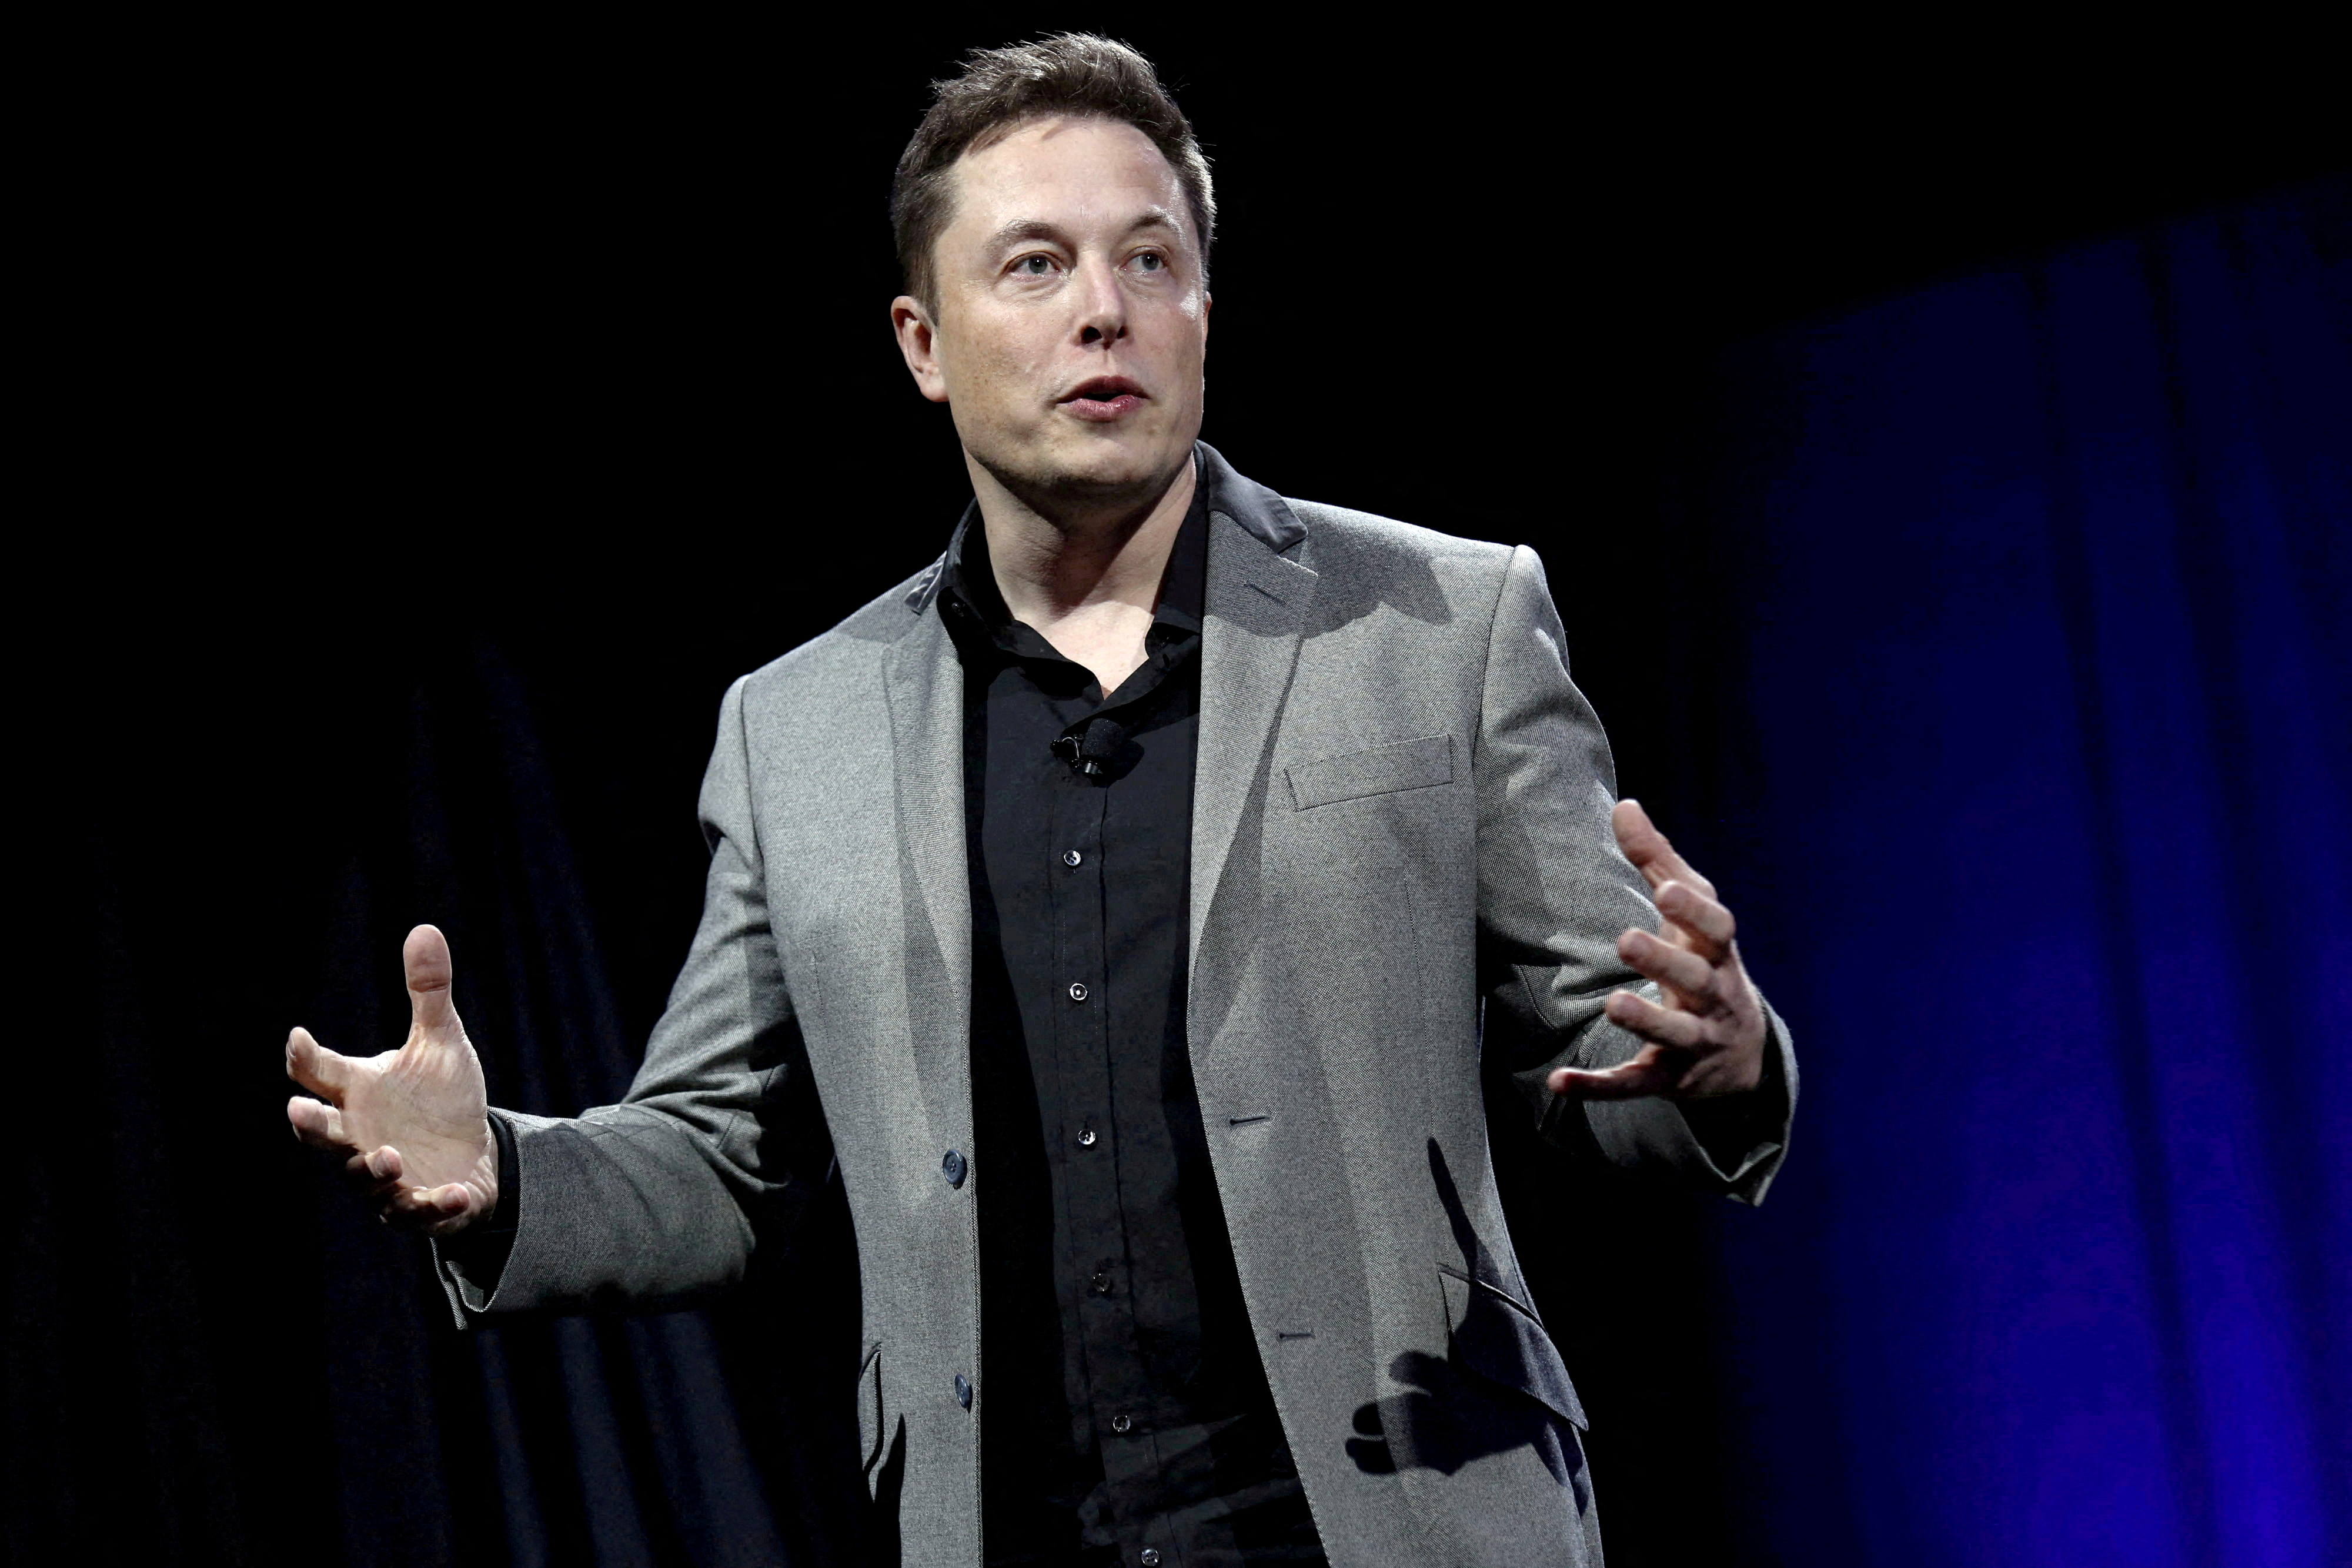 Employees called for Space X to separate from its owner Elon Musk's personal brand. 